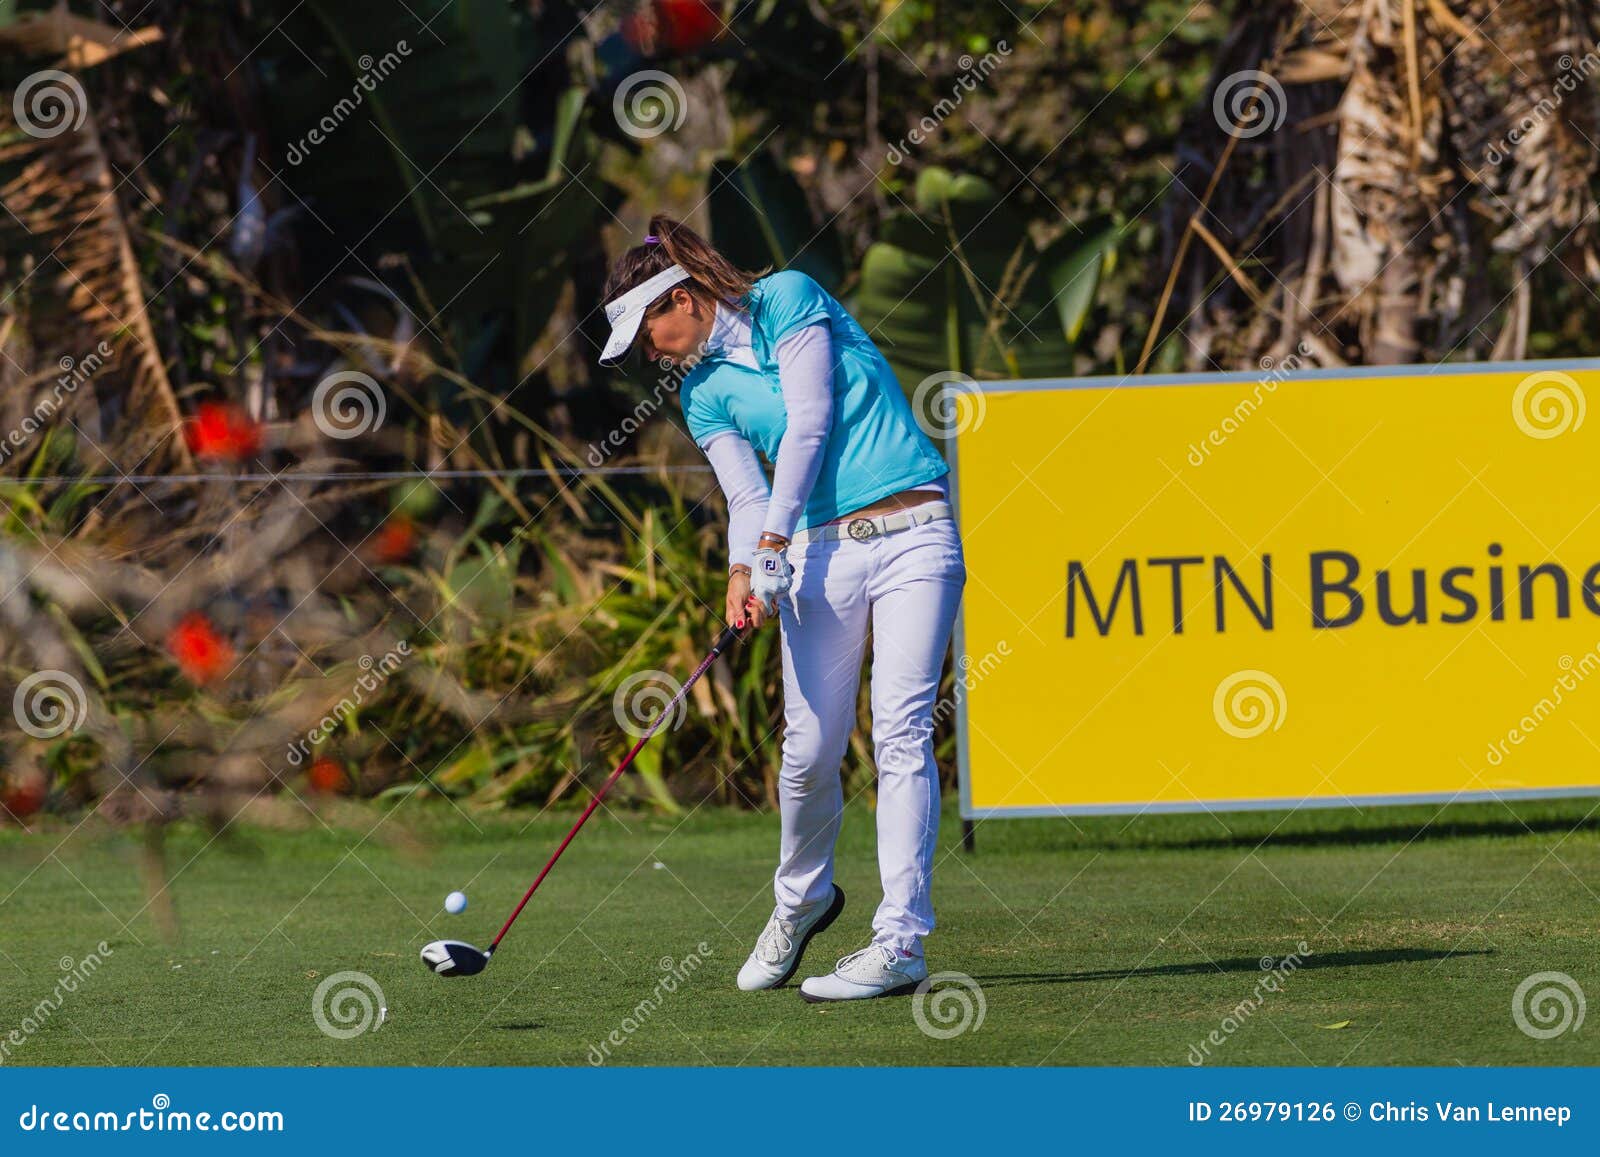 Golfer Klatten Driving Ball. Lady Pro Golfer Klatten from Germany striking the ball with a driver wood at the par four in the final round of Ladies Professional Golf at Selborne CC at the south coast of KZ Natal Province in South Africa.